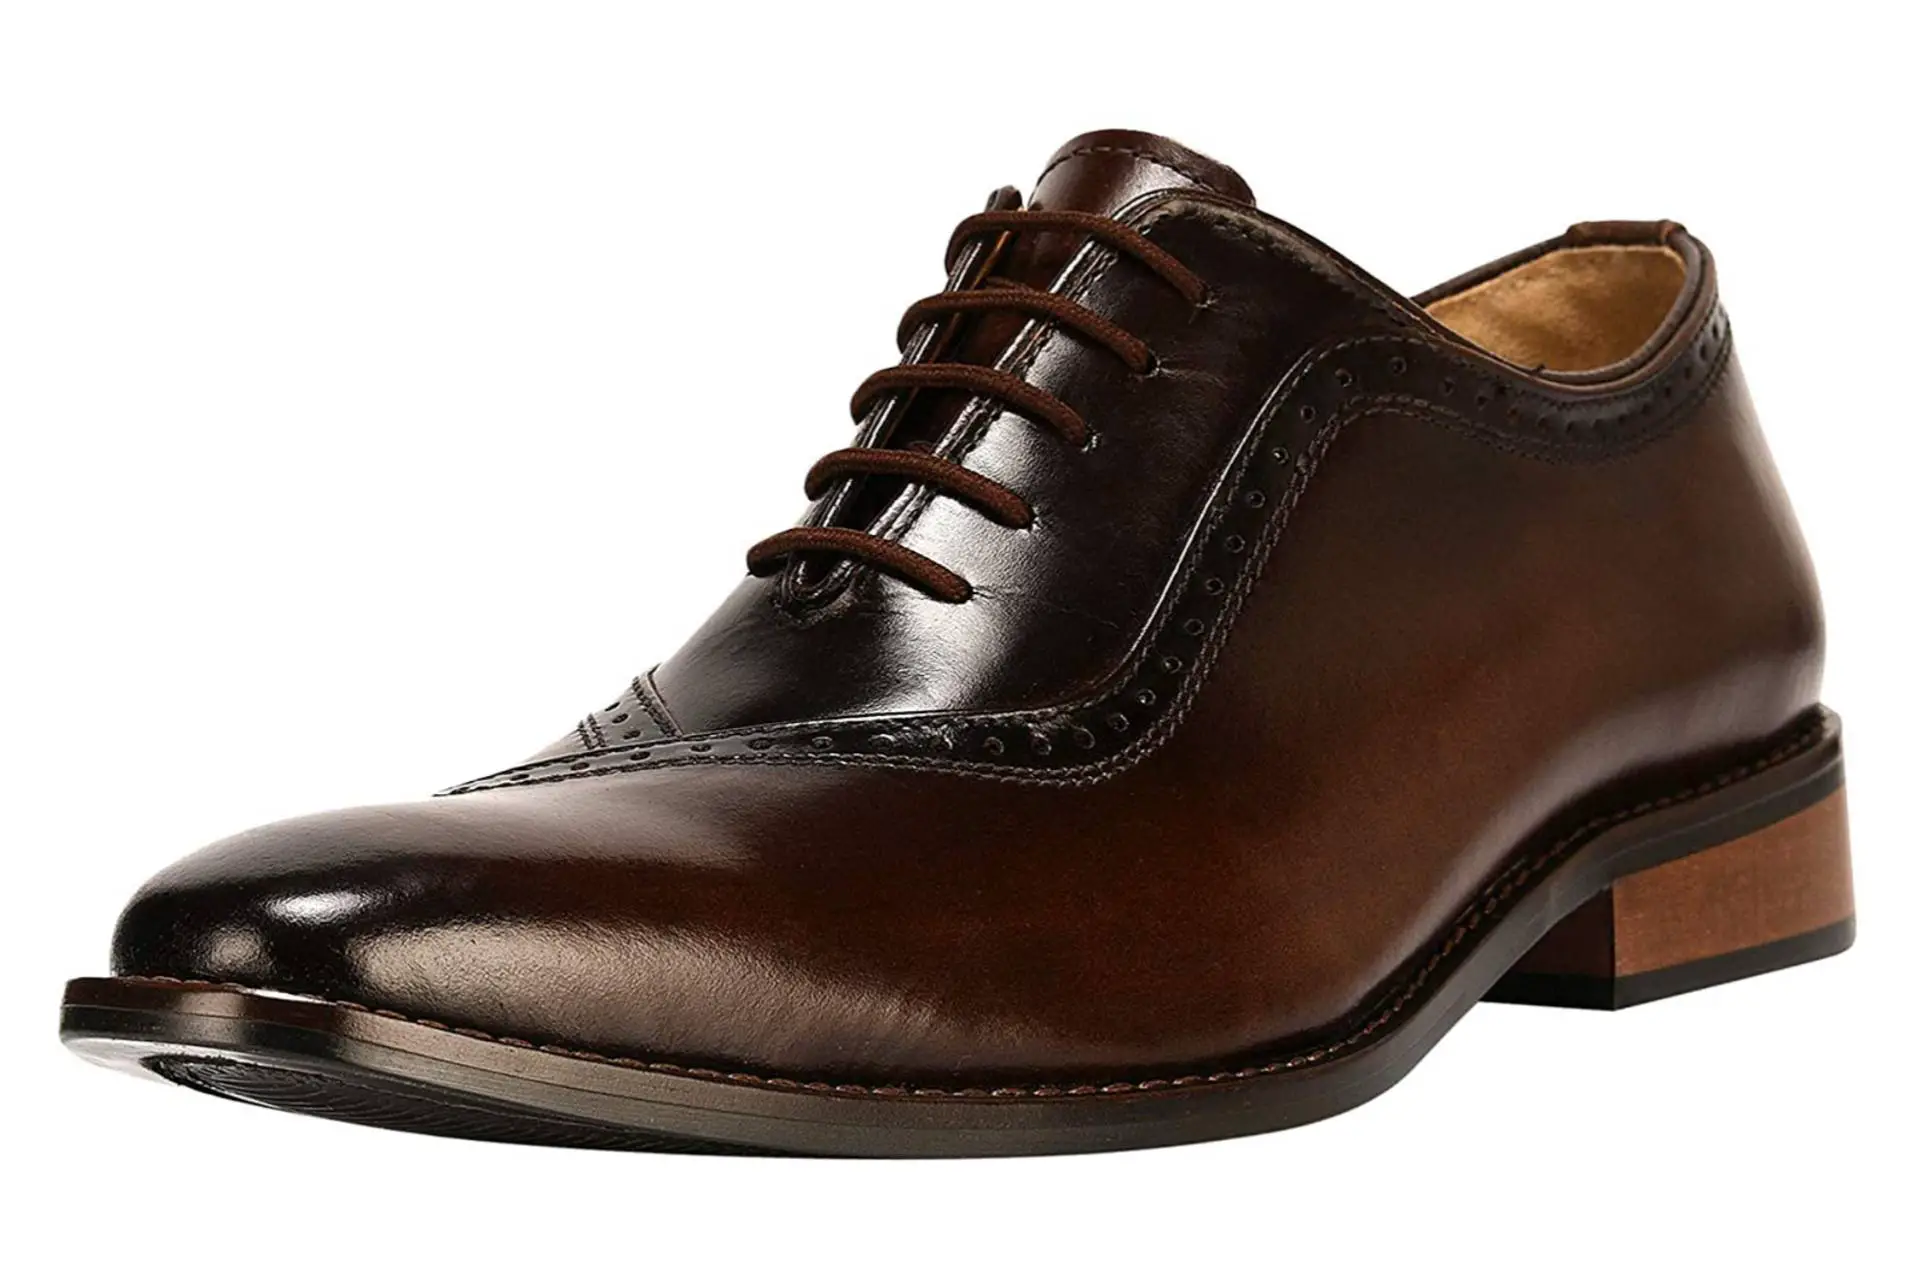 Men's Oxford shoe for work